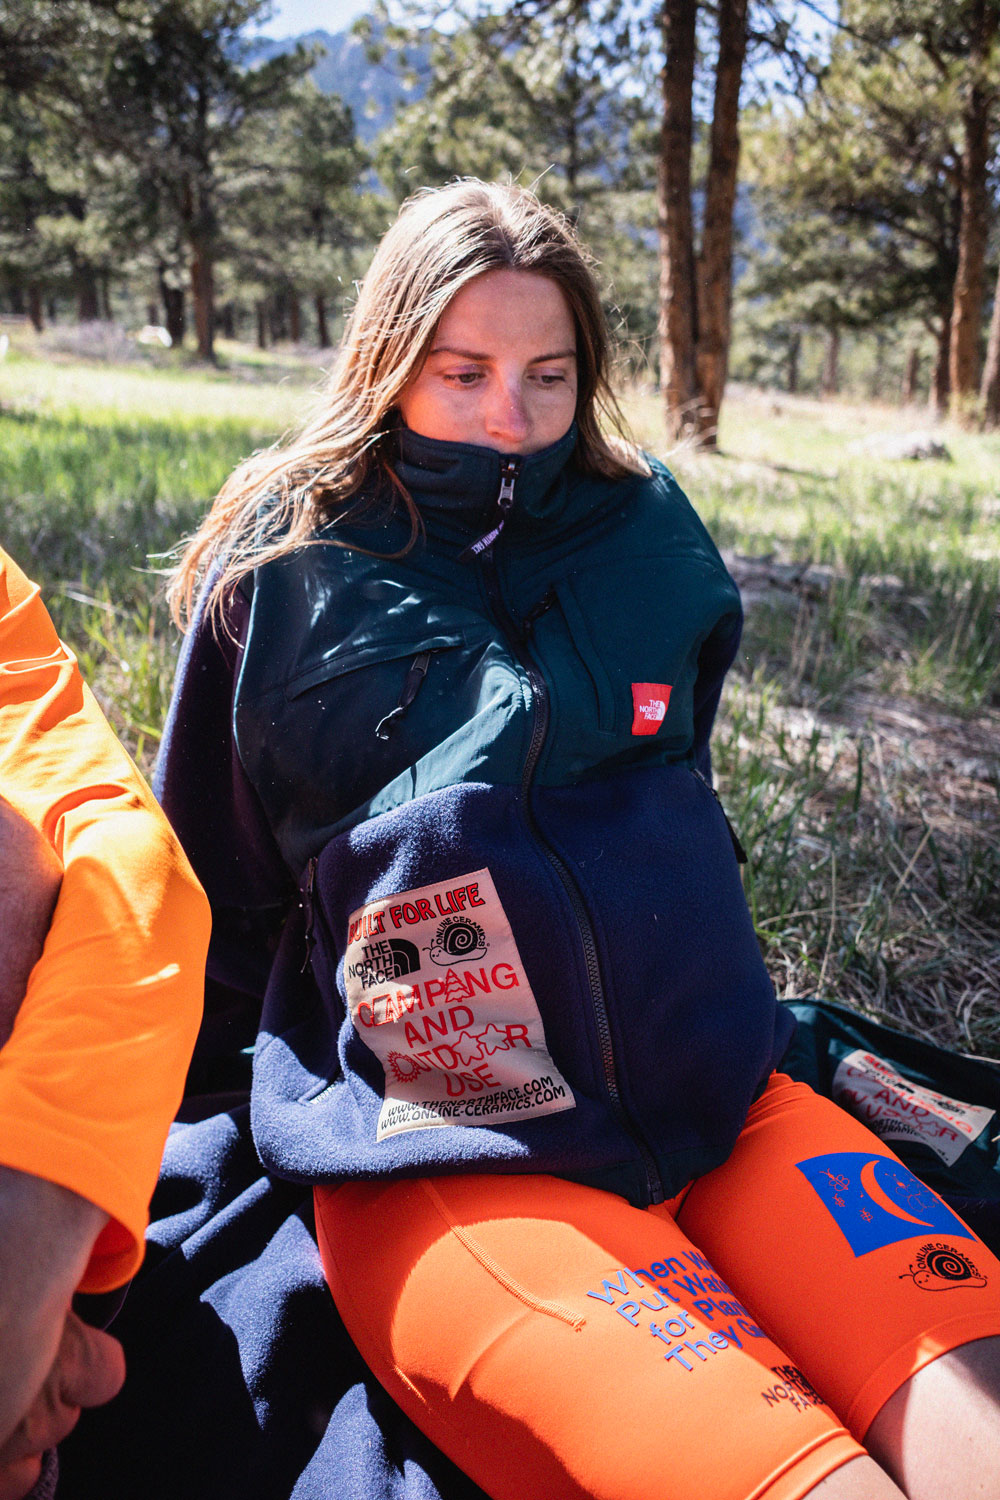 North Face x Online Ceramics Cosmic Camp Gear Collab | Field Mag